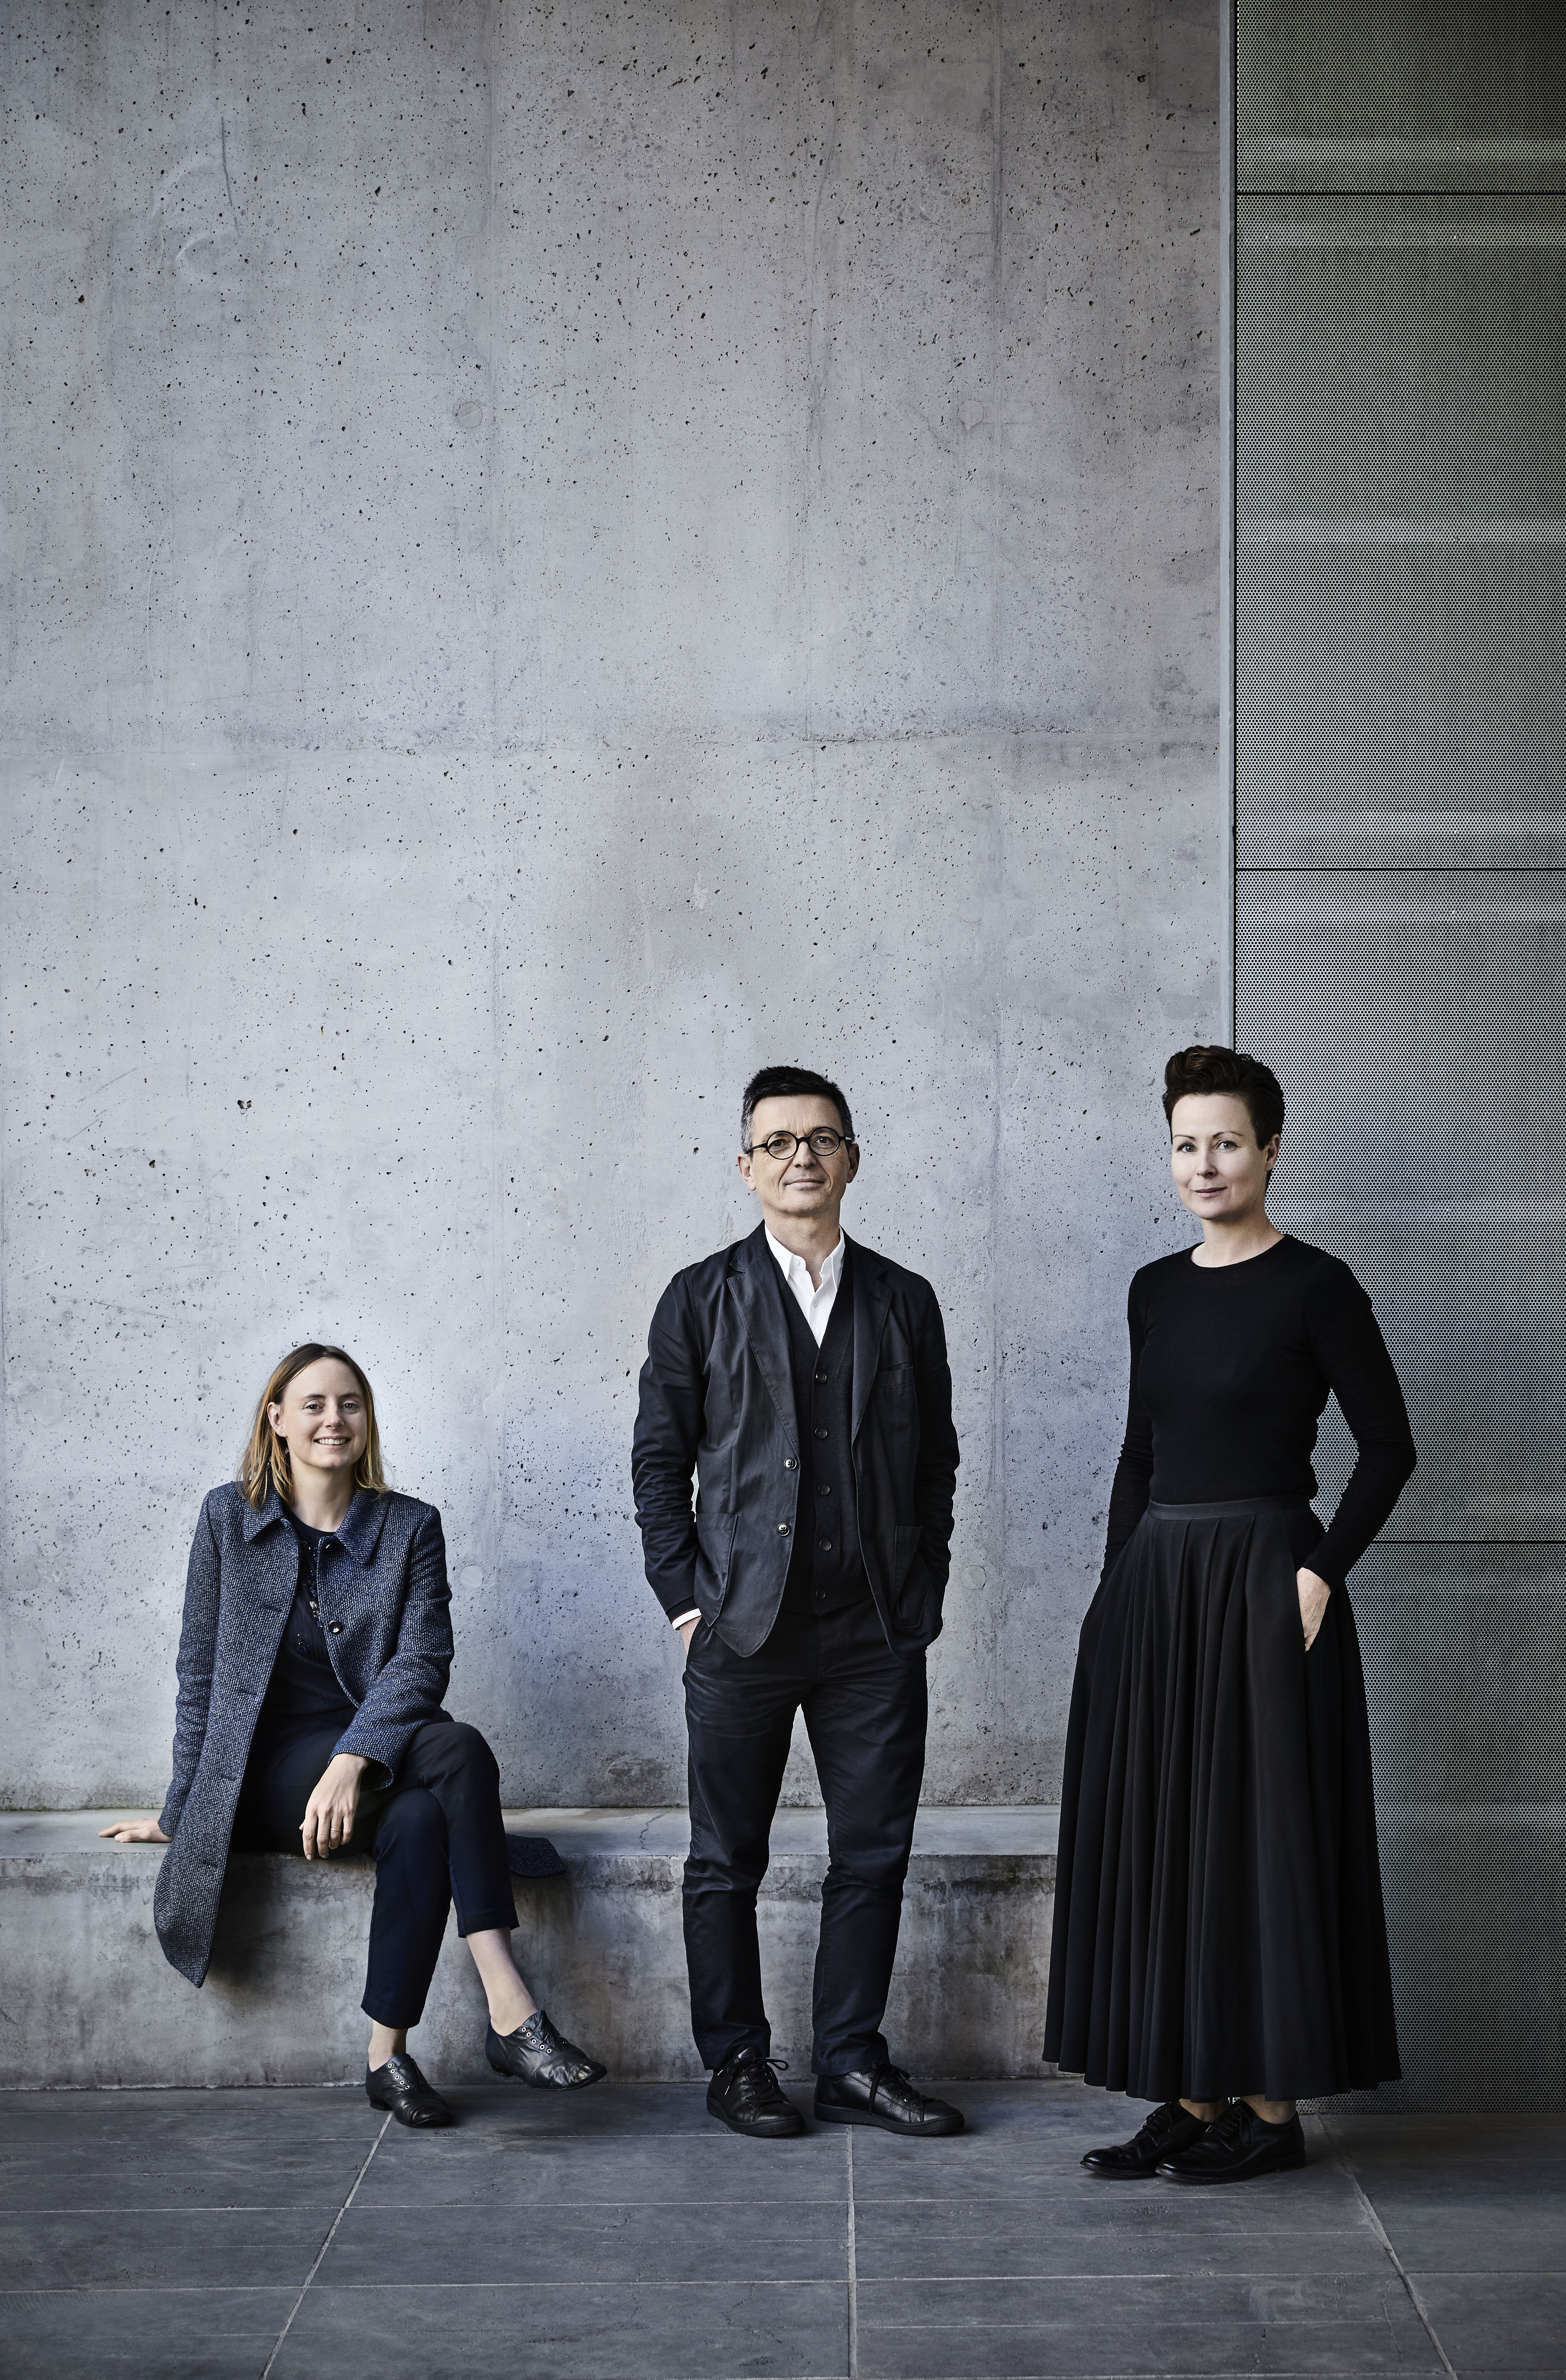 The 2018 creative team (L-R), artist Linda Tegg with Mauro Baracco and Louise Wright of Baracco+Wright Architects. Photo by Sharyn Cairns.